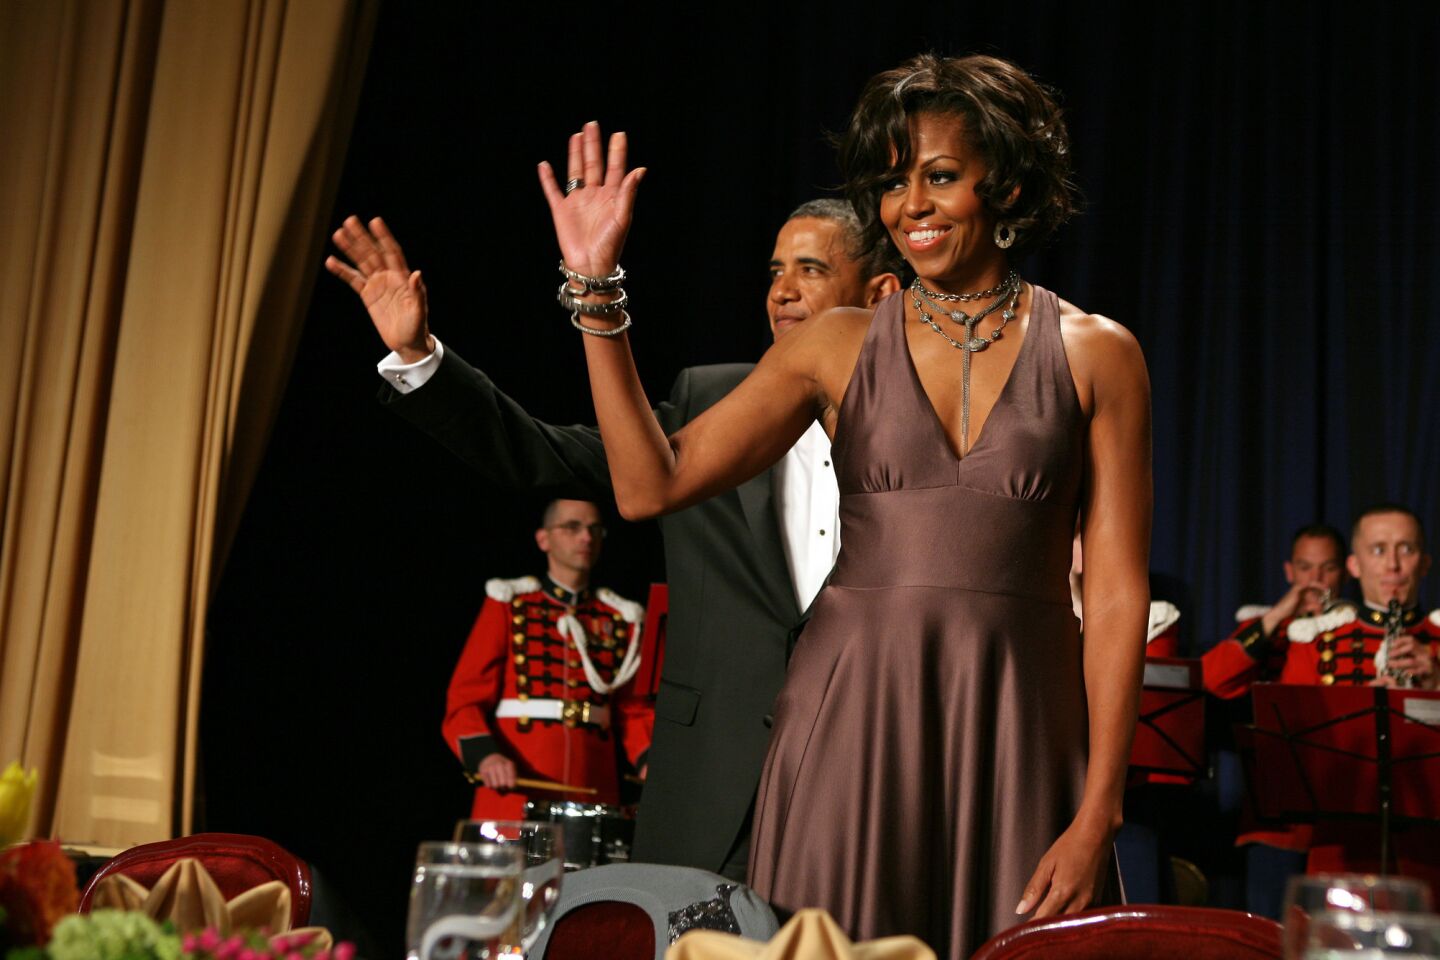 First Lady Michelle Obama is dressed in elegant American style at the 2009 White House correspondents dinner in a mauve-chocolate empire-waist gown accessorized by multiple bracelets and necklaces. She wears her hair in flattering loose curls.